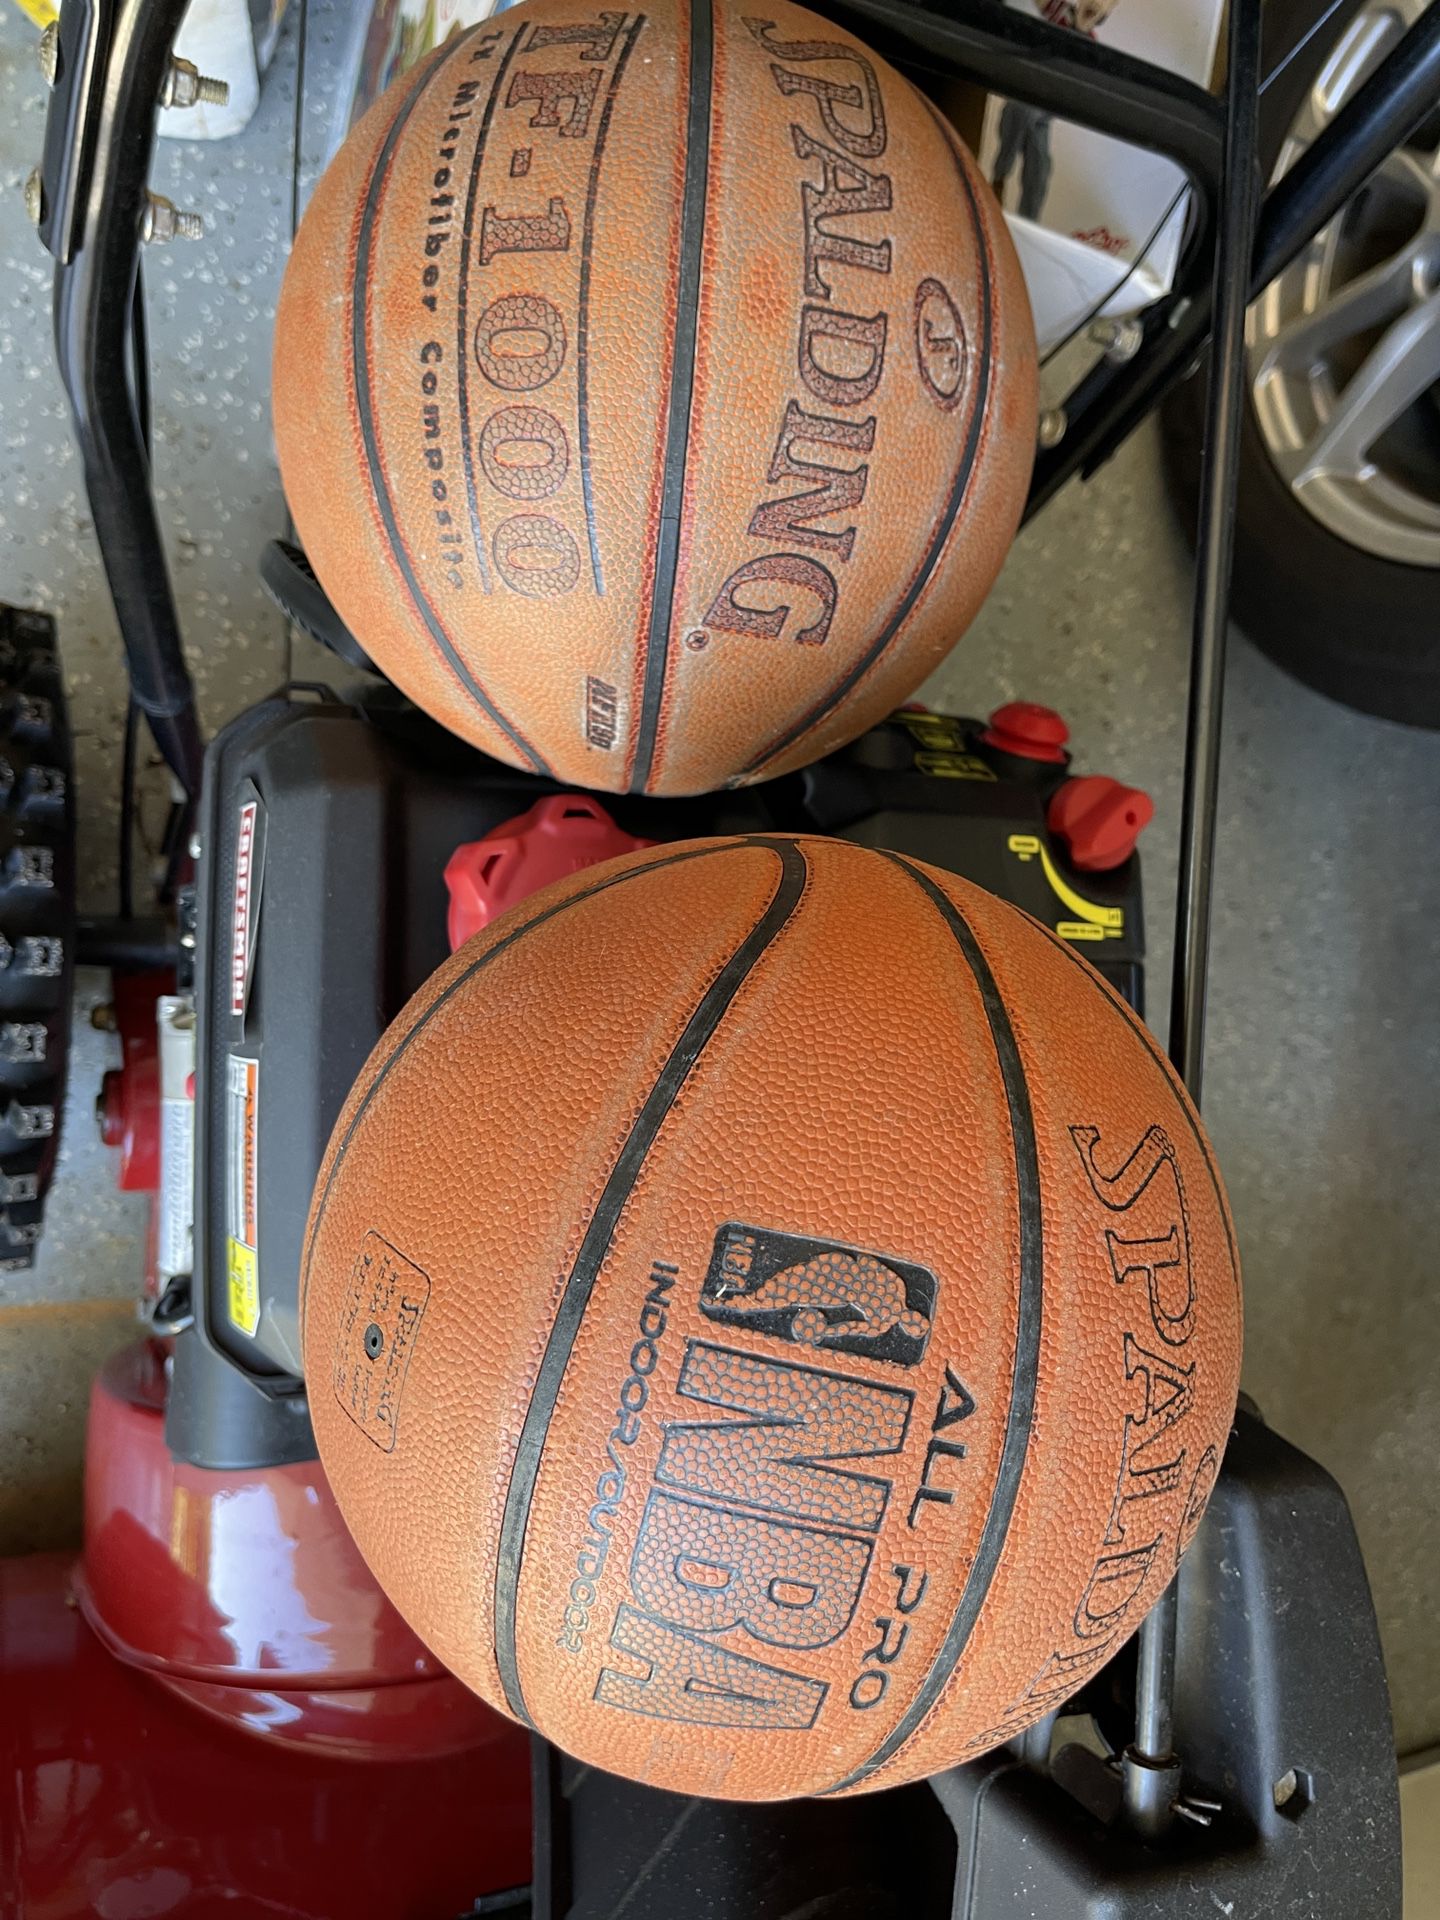 Two Basketballs For $5